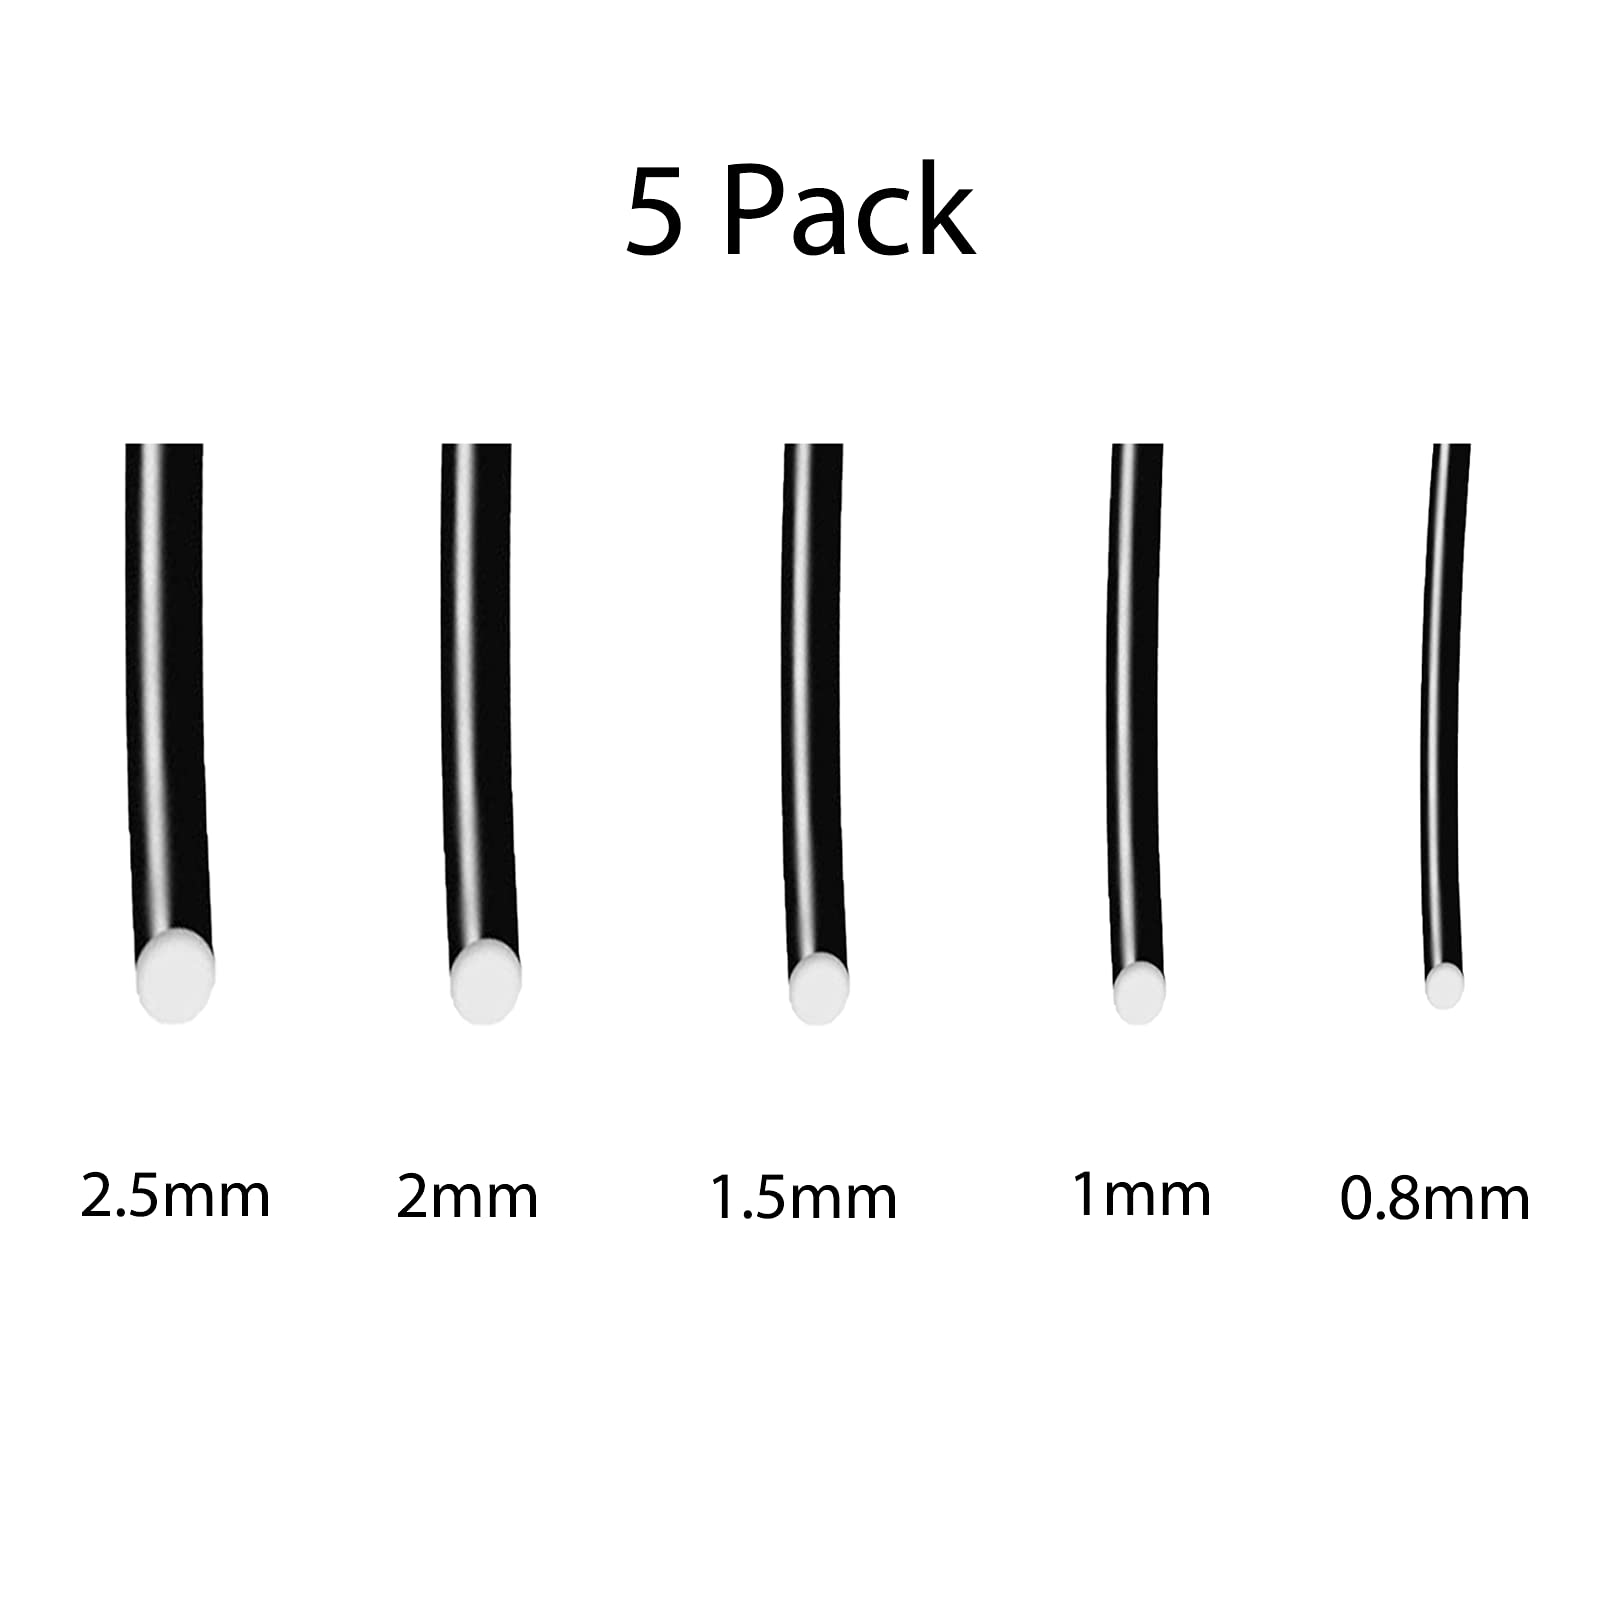 NA 5 Rolls Bonsai Wires and Bonsai Tool Kit, 5-Size Starter Set - 0.8mm,1mm,1.5mm,2mm,2.5mm(16 feet Each) with Wire Cutter Aluminum Wire for Shaping Styling Indoor Bonsai Trees (Black)